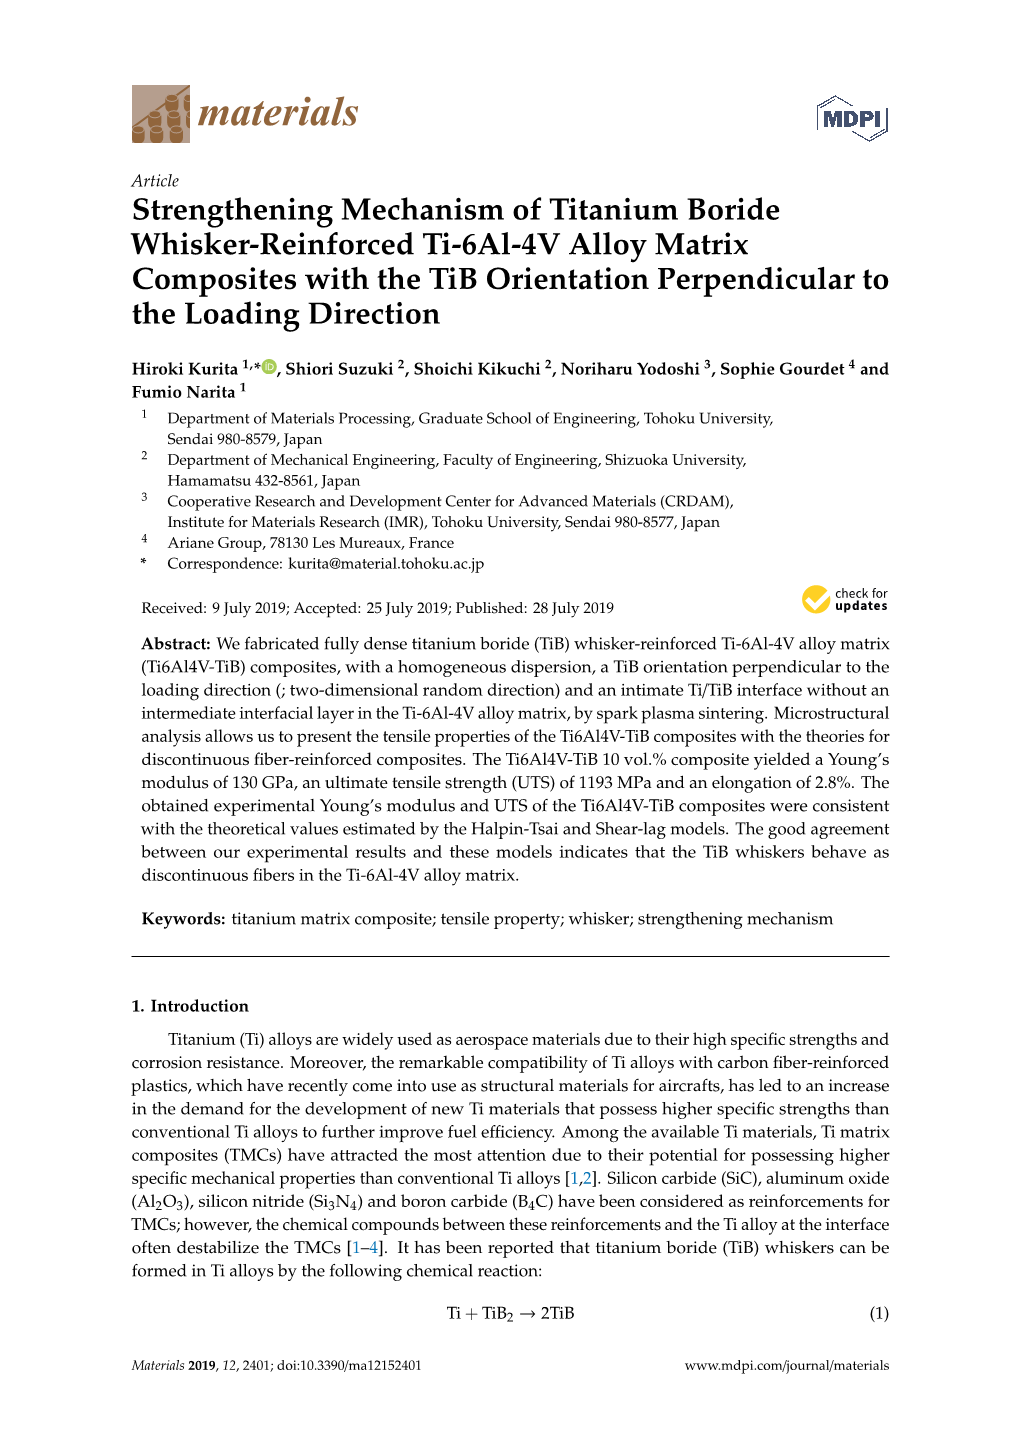 Strengthening Mechanism of Titanium Boride Whisker-Reinforced Ti-6Al-4V Alloy Matrix Composites with the Tib Orientation Perpendicular to the Loading Direction